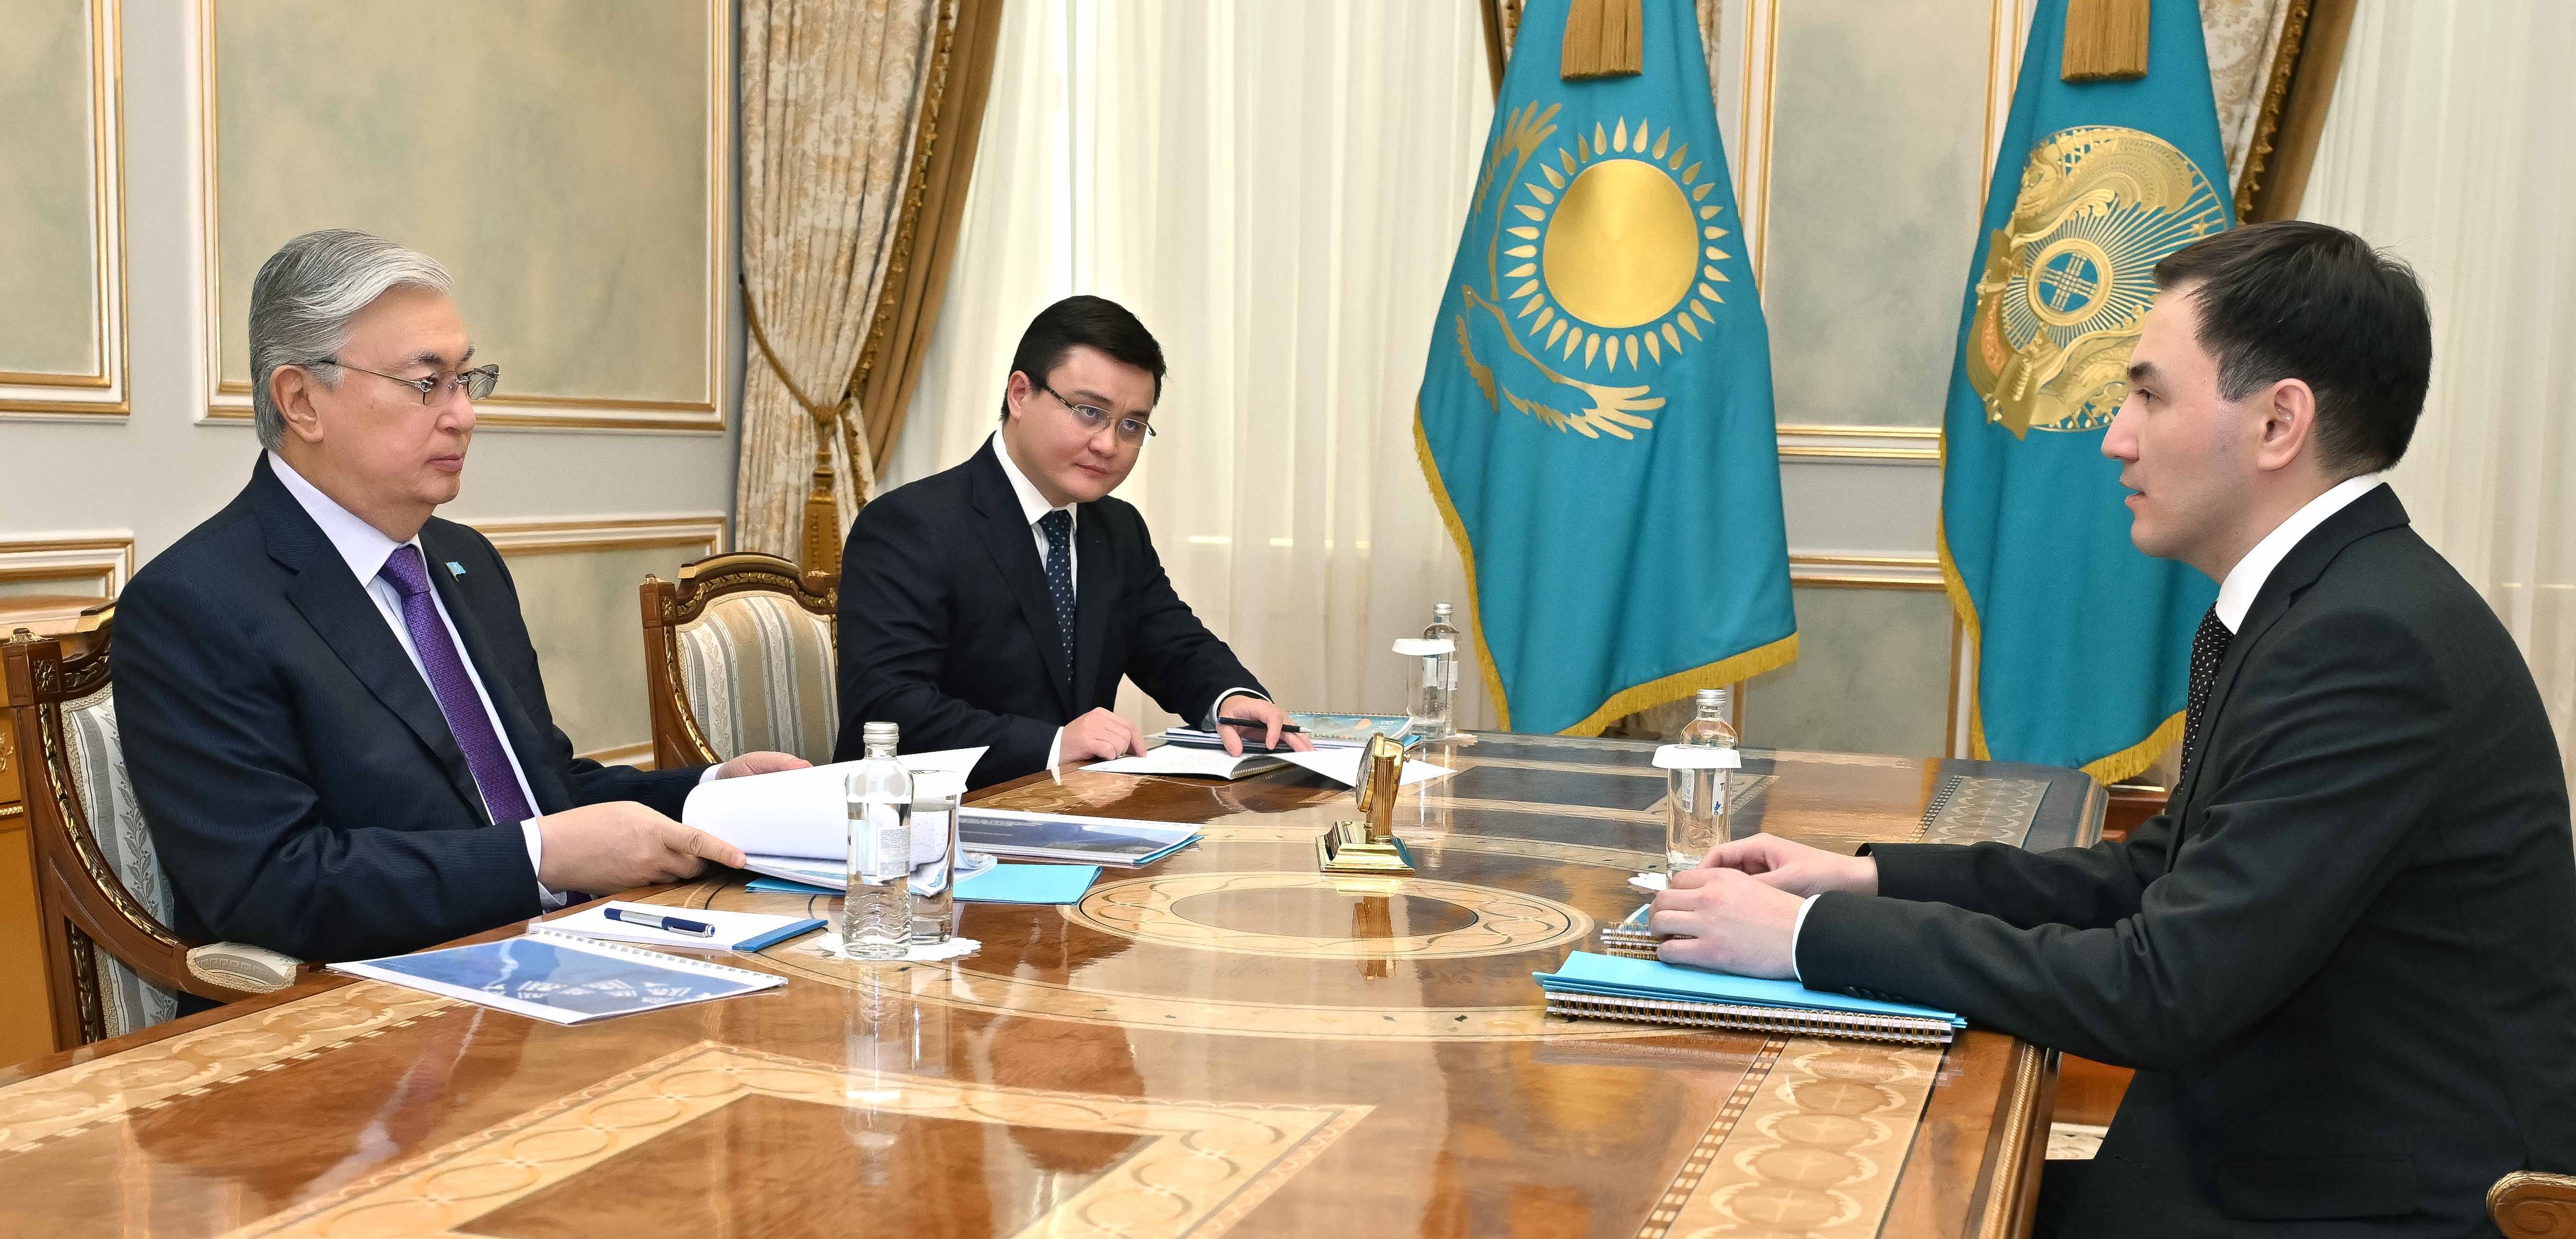 The head of state met with the Chairman of the Agency for Strategic Planning and Reforms Zhandos Shaimardanov